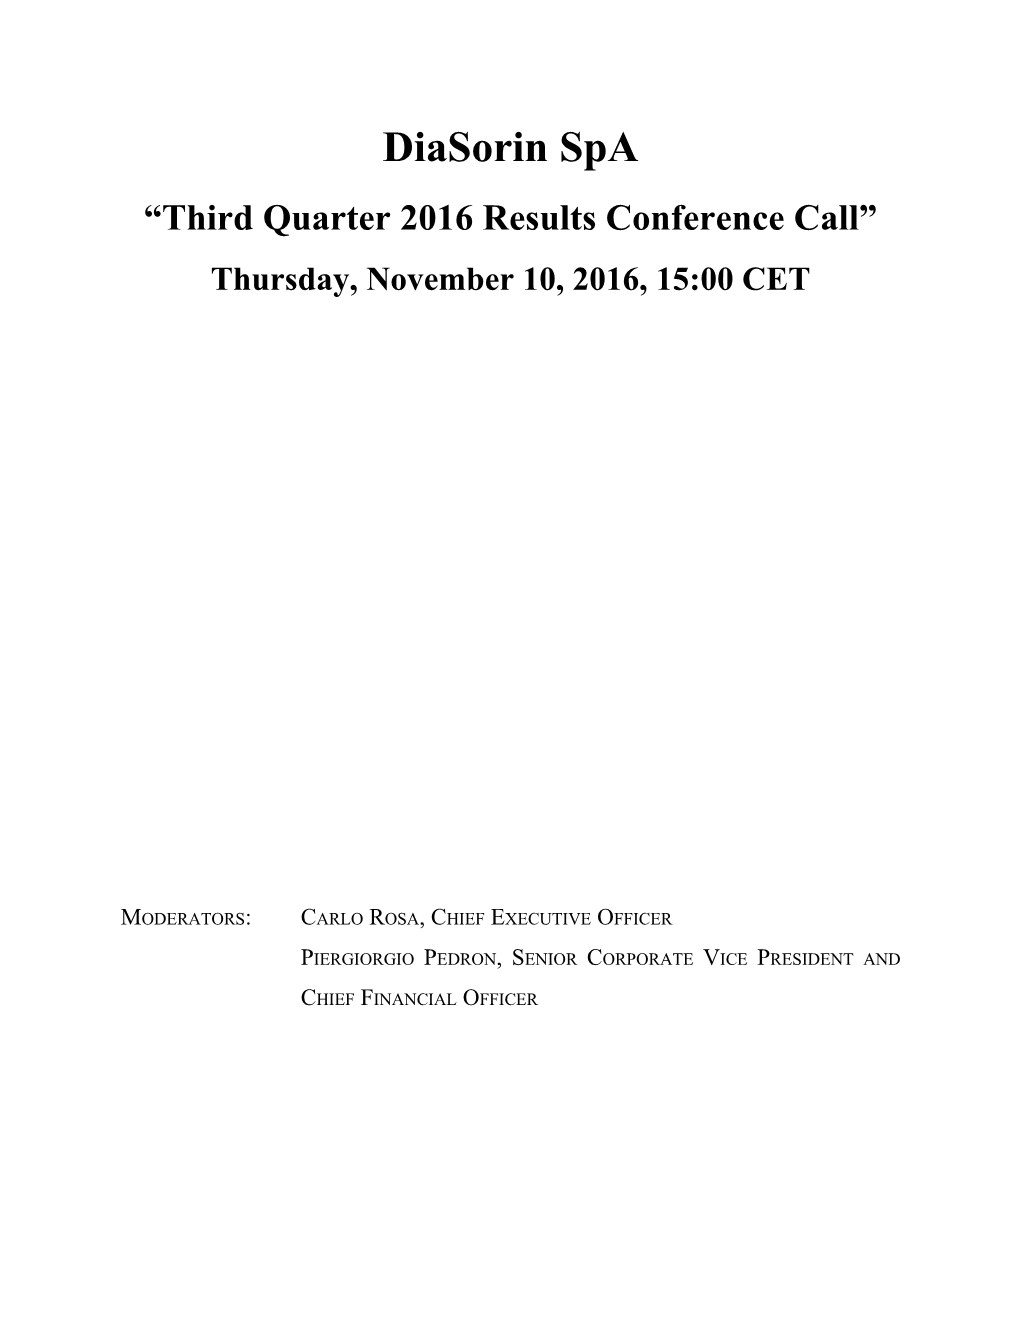 Third Quarter 2016 Results Conference Call